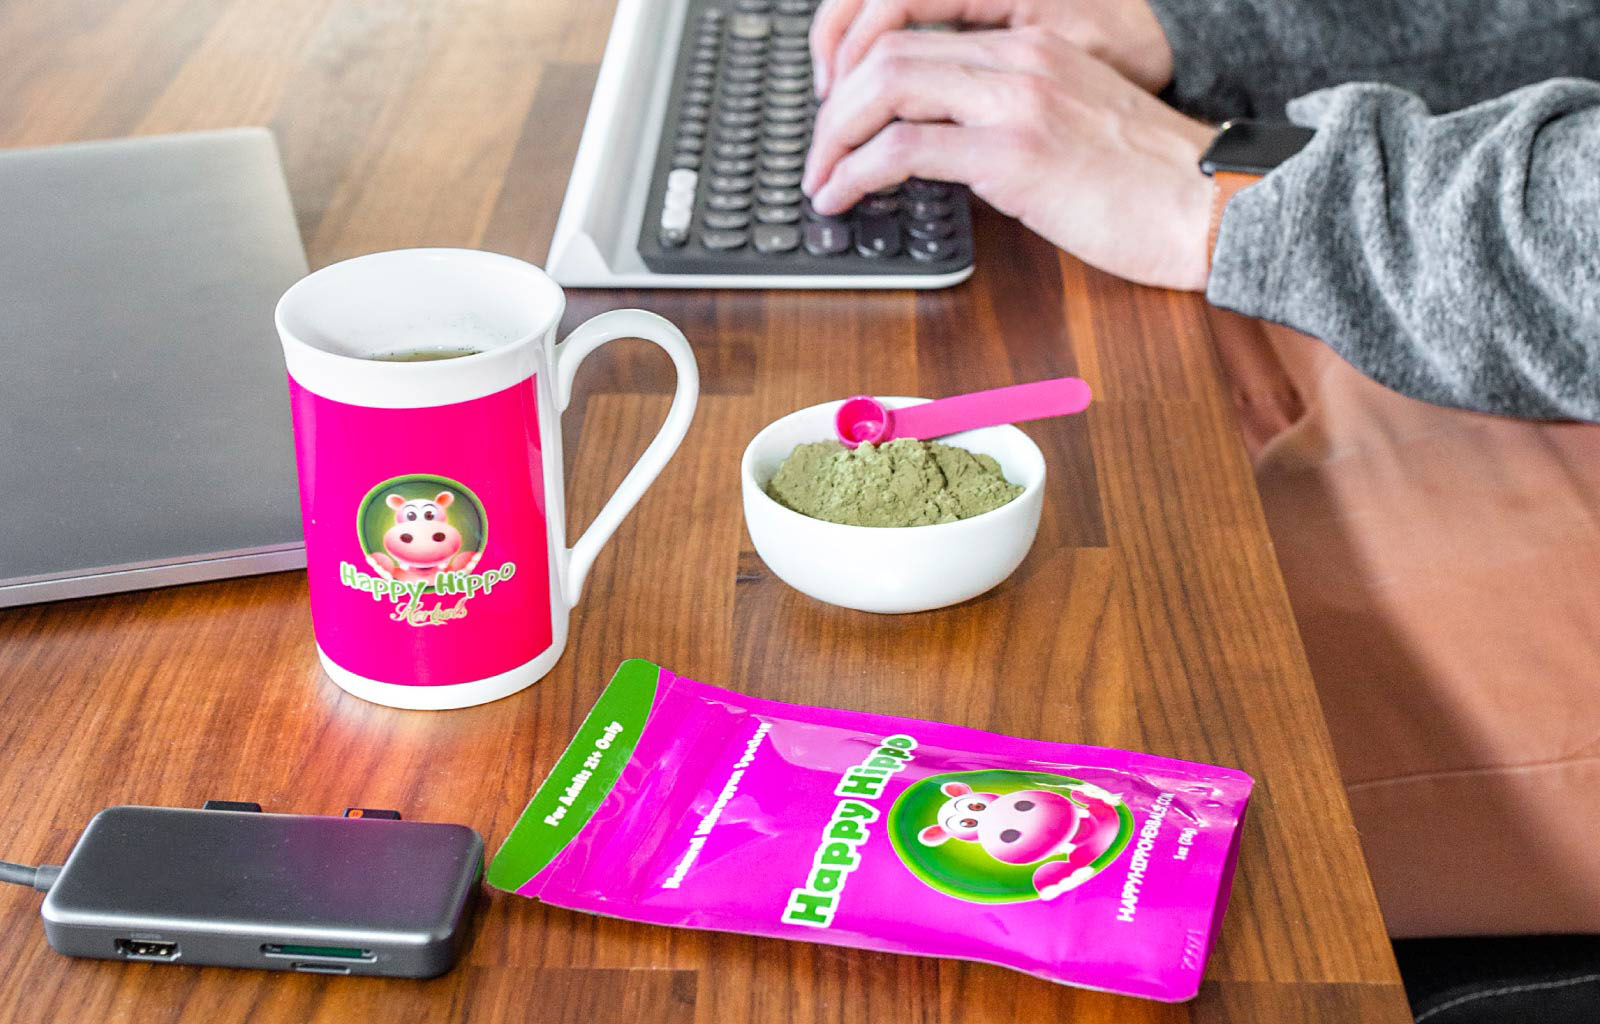 Featured image depicting a packet of Happy Hippo brand kratom powder, and a cup of kratom tea next to someone's keyboard and computer desktop at work.